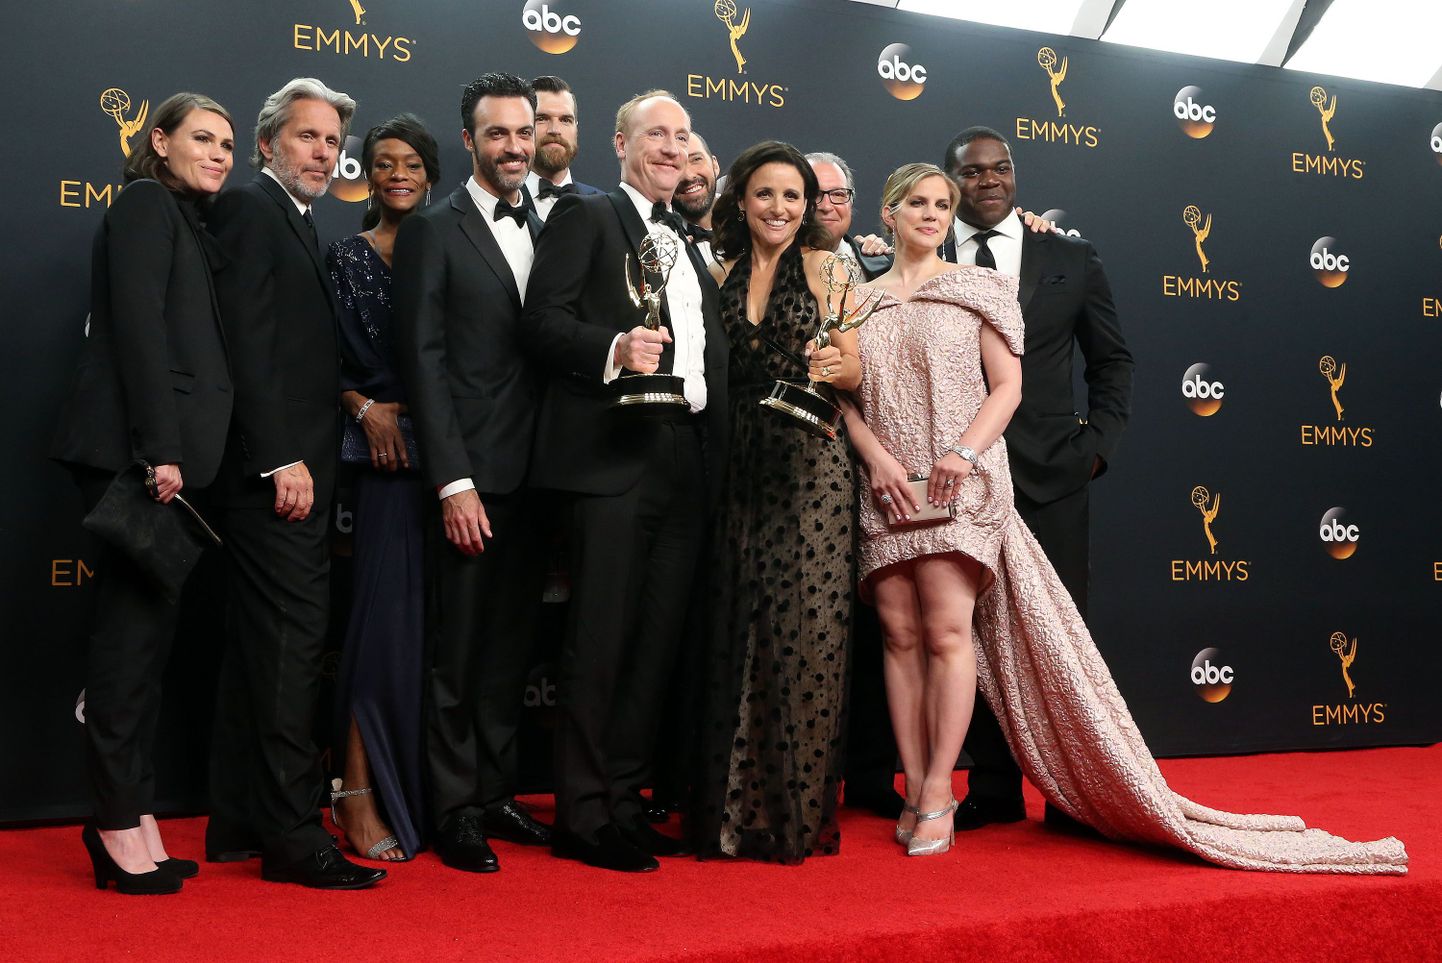 18 September 2016 - Los Angeles, California - Sarah Sutherland, Gary Cole, Sufe Bradshaw, Reid Scott, Matt Walsh, Timothy Simons, Julia Louis-Dreyfus, Tony Hale, Kevin Dunn, Anna Chlumsky and Sam Richardson, winners of Best Comedy Series for 'Veep'. 68th Annual Primetime Emmy Awards held at Microsoft Theater. Photo Credit: AdMedia *** Please Use Credit from Credit Field ***